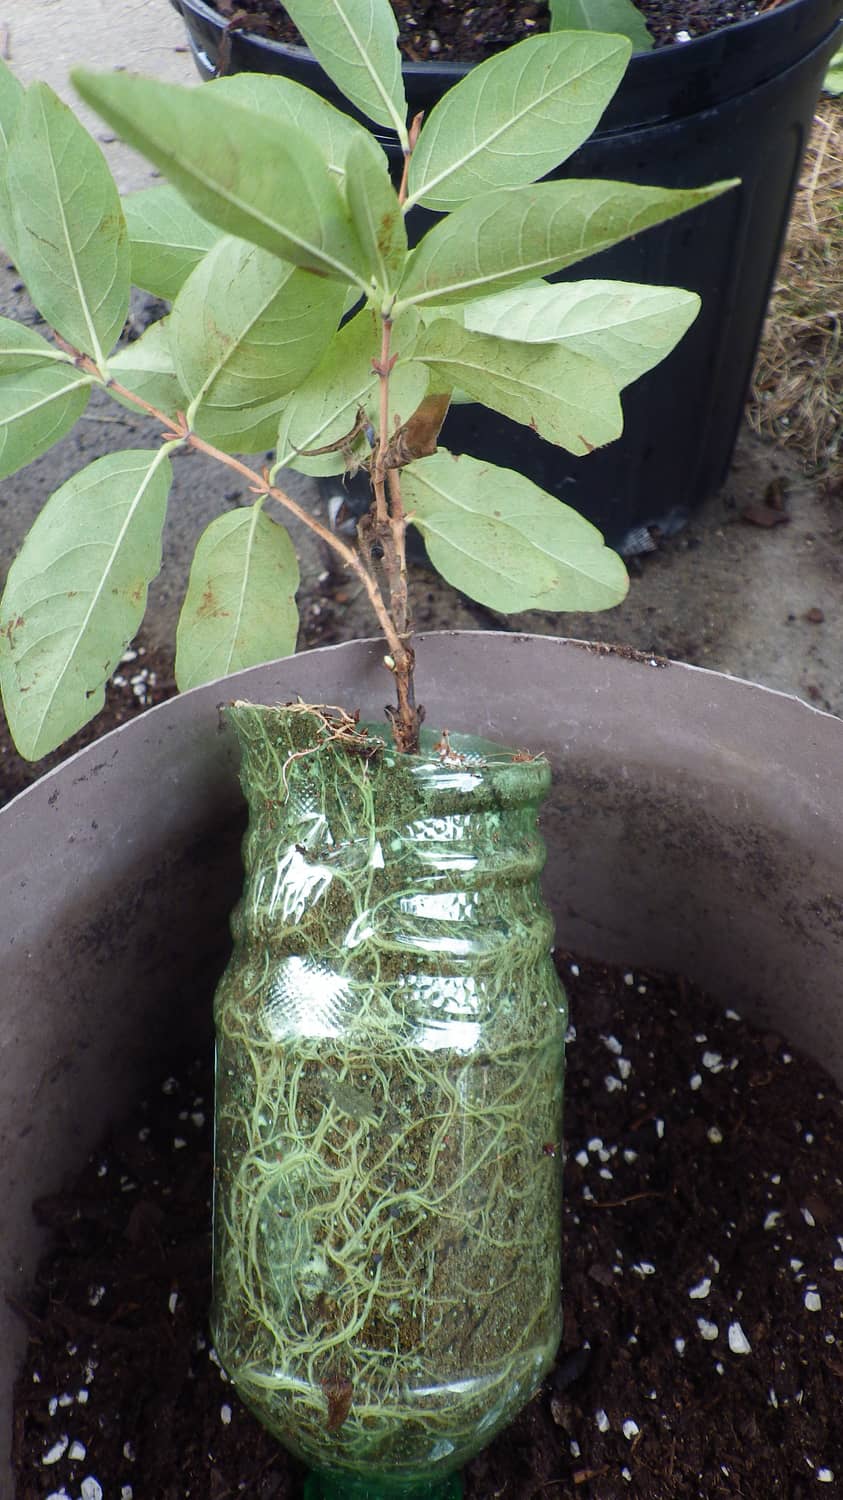 Step 5 of marcotting: cut the branch from the mother plant and transfer to its own container.